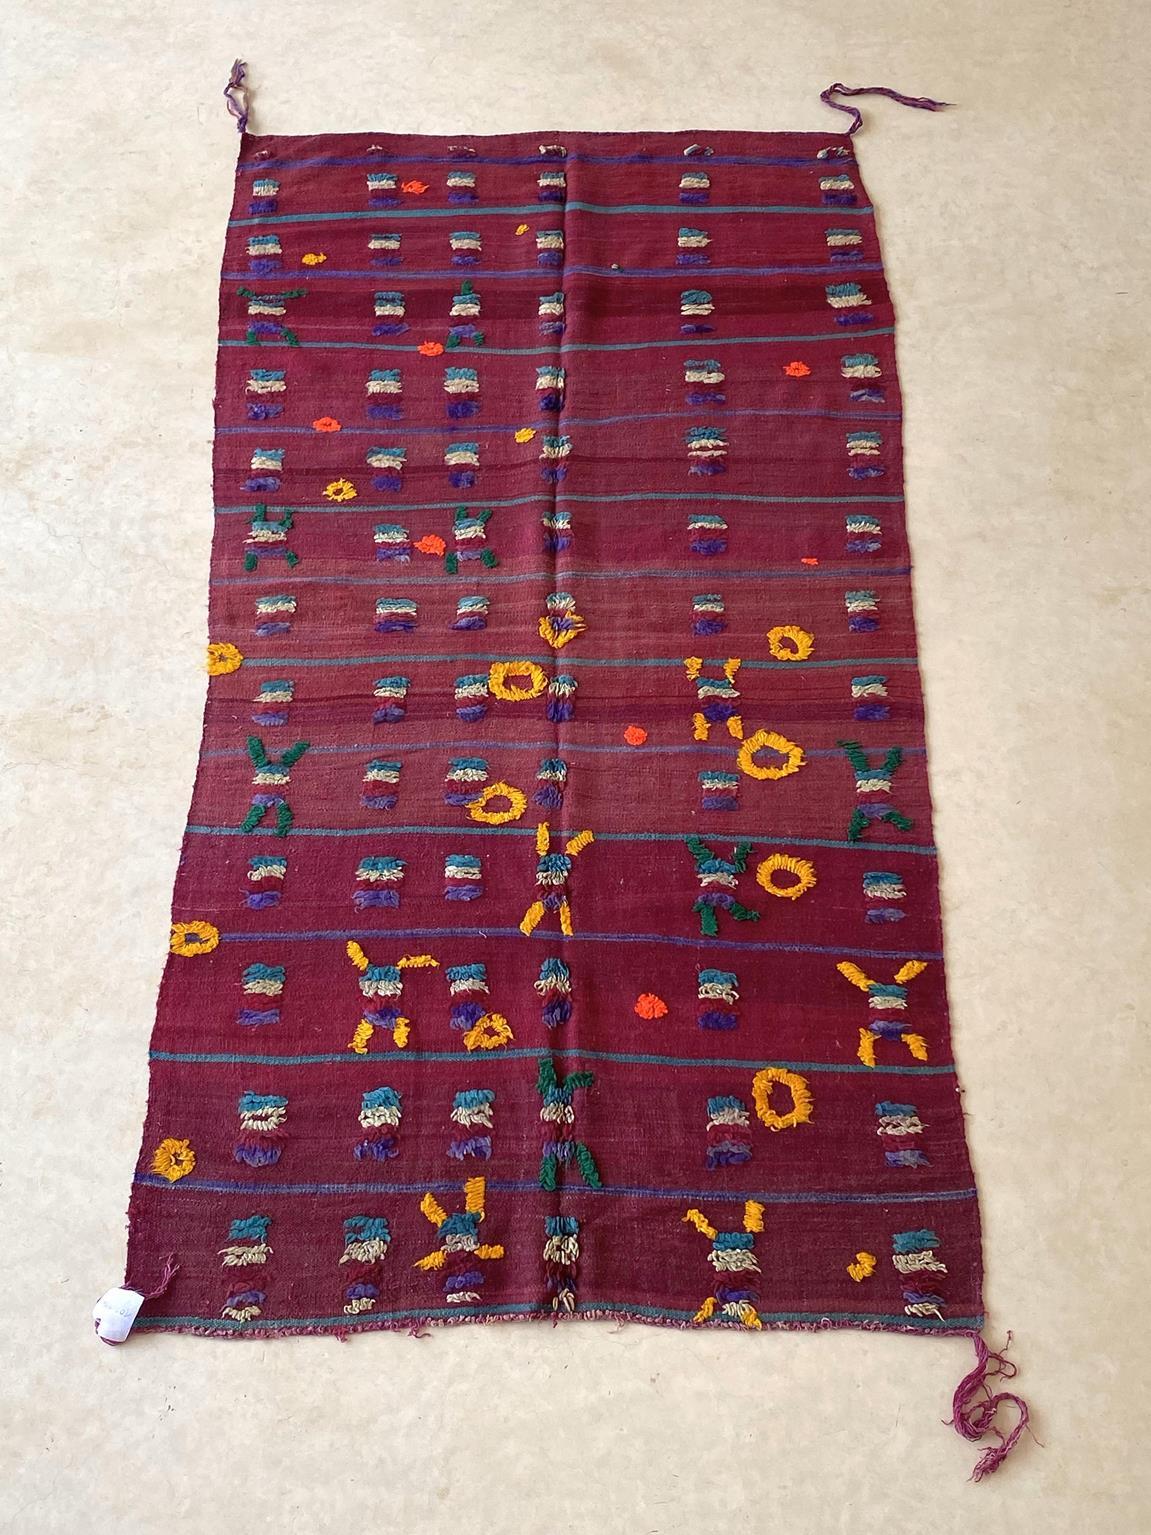 This item is so lovely! I would say that it is between a very light kilim rug and a thick blanket, piece of textile. It seems to sparkle with its multiple tuffed designs in white, turquoise, purple, green, orange and yellow over a flatweave